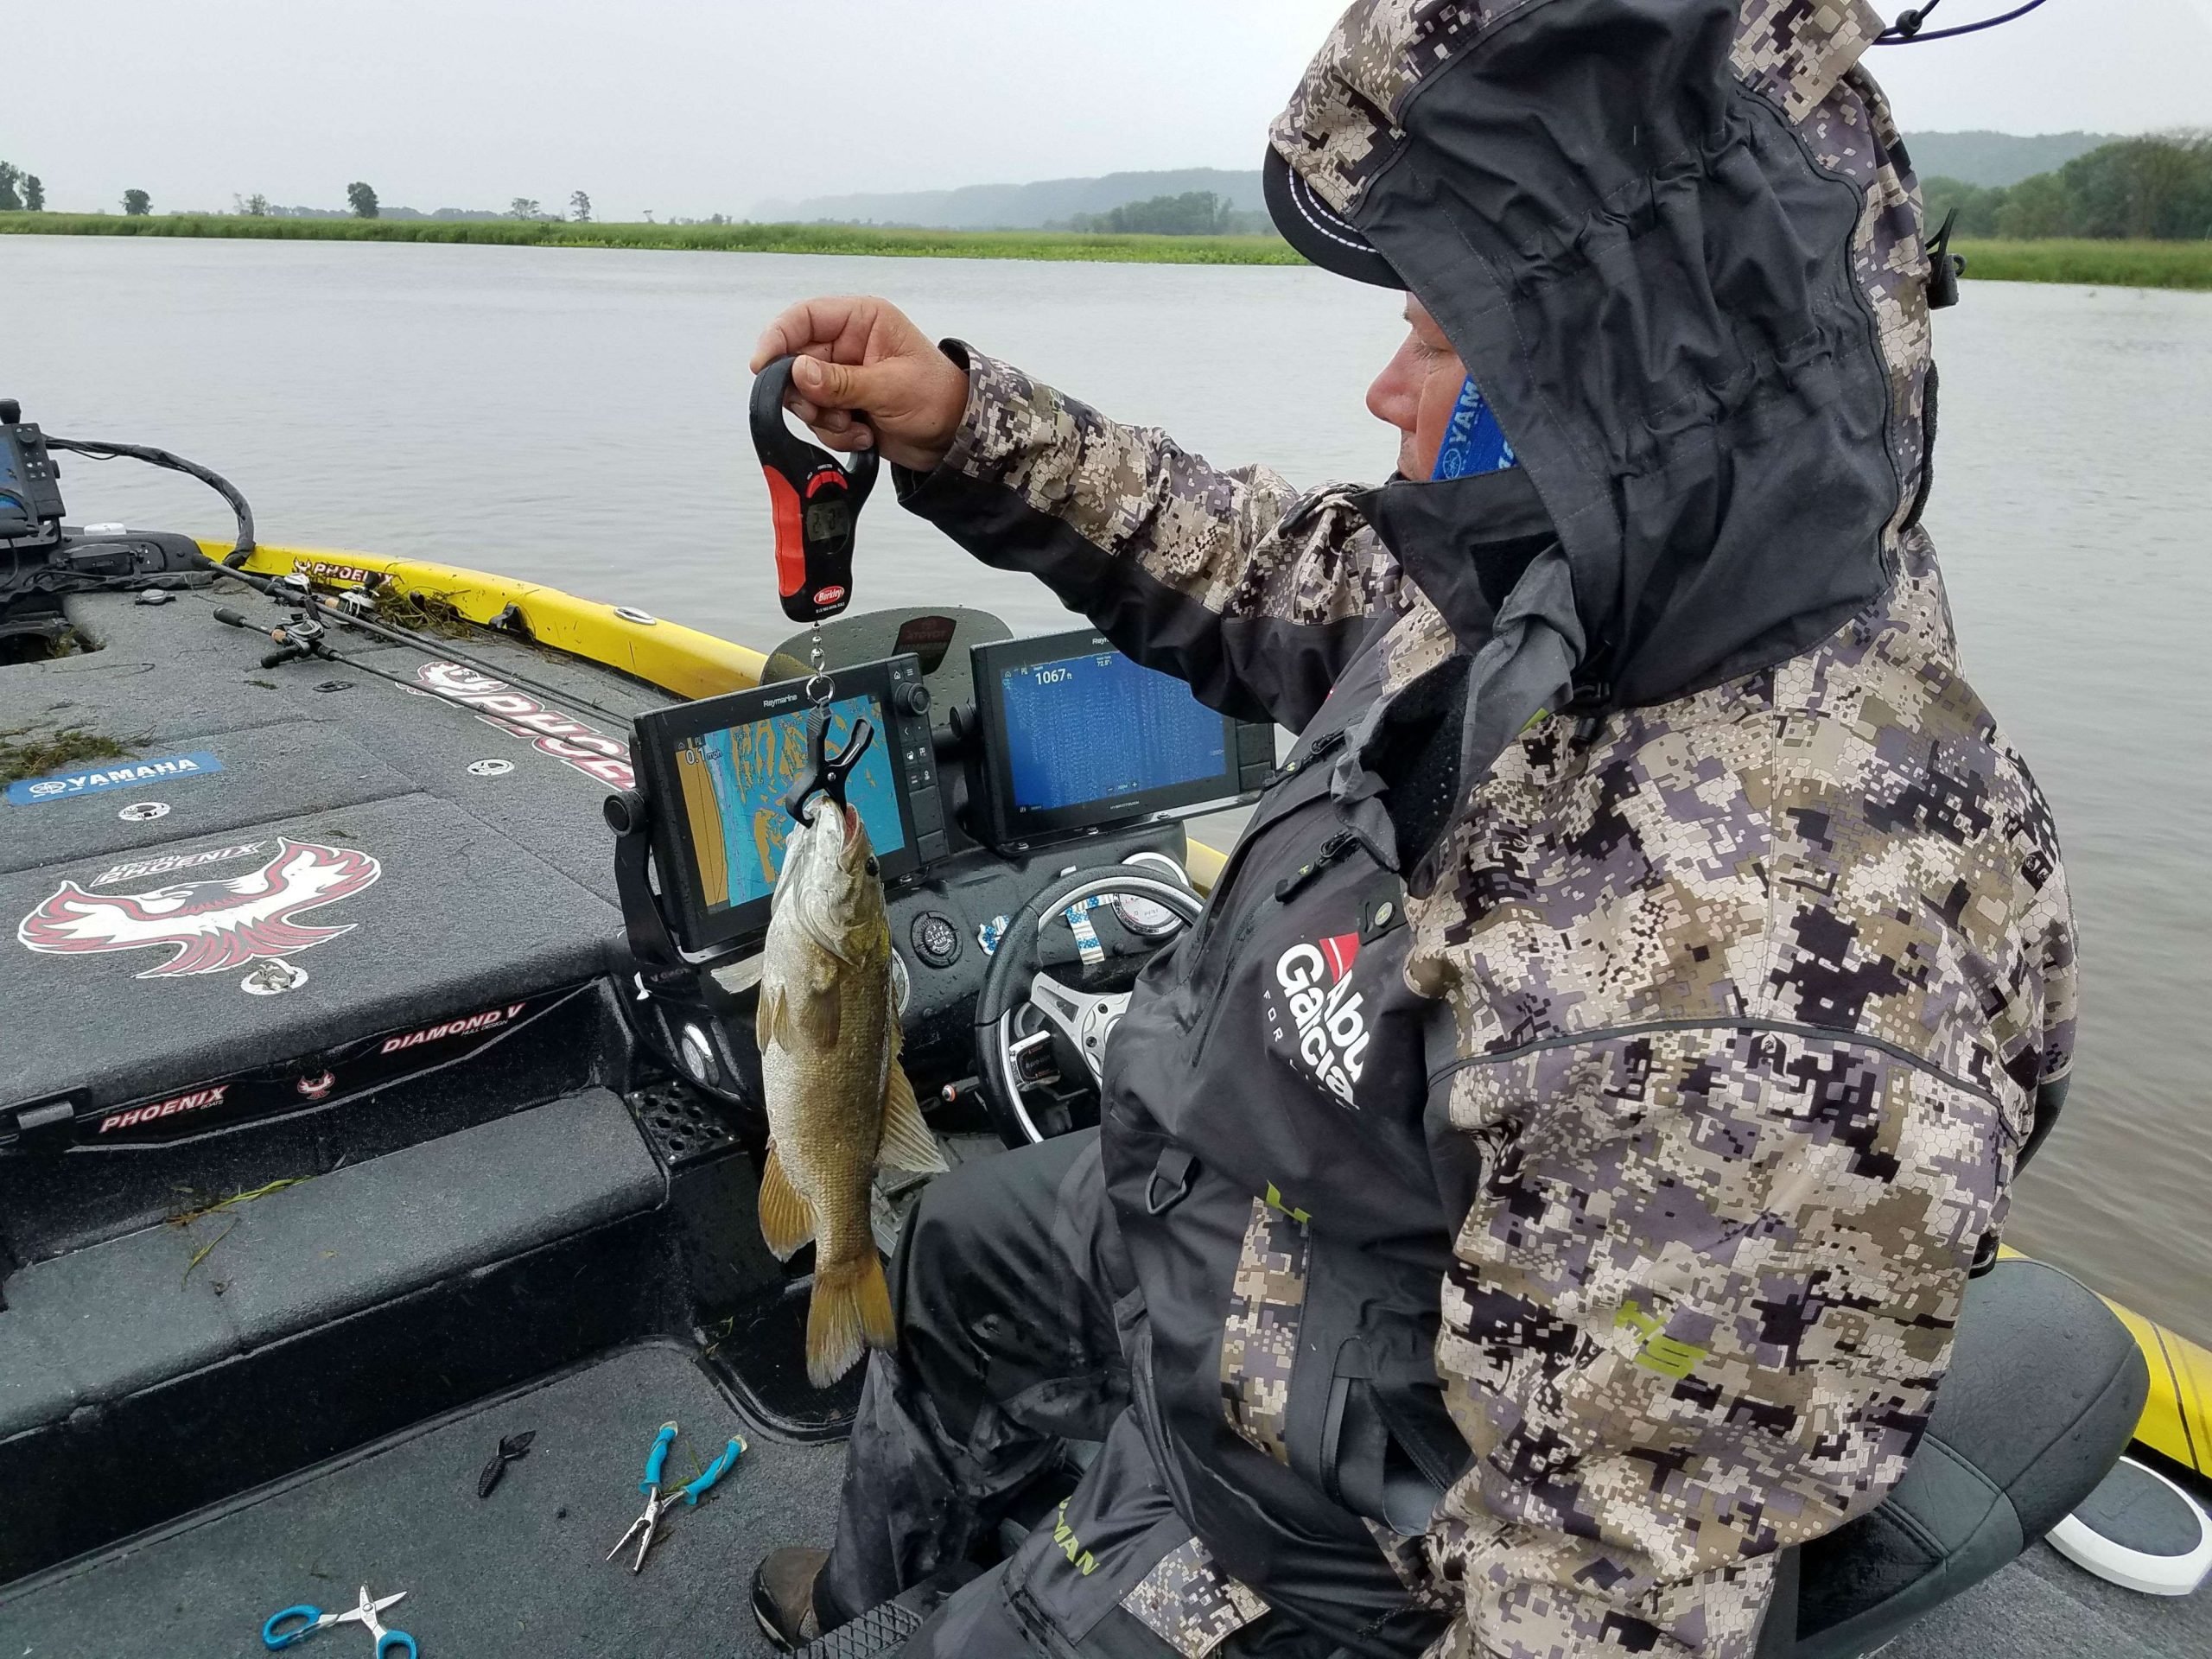 Bobby Lane just upgraded with a nice smallmouth on the Mississippi River! There is a little break in the weather from the rain and the day continues.